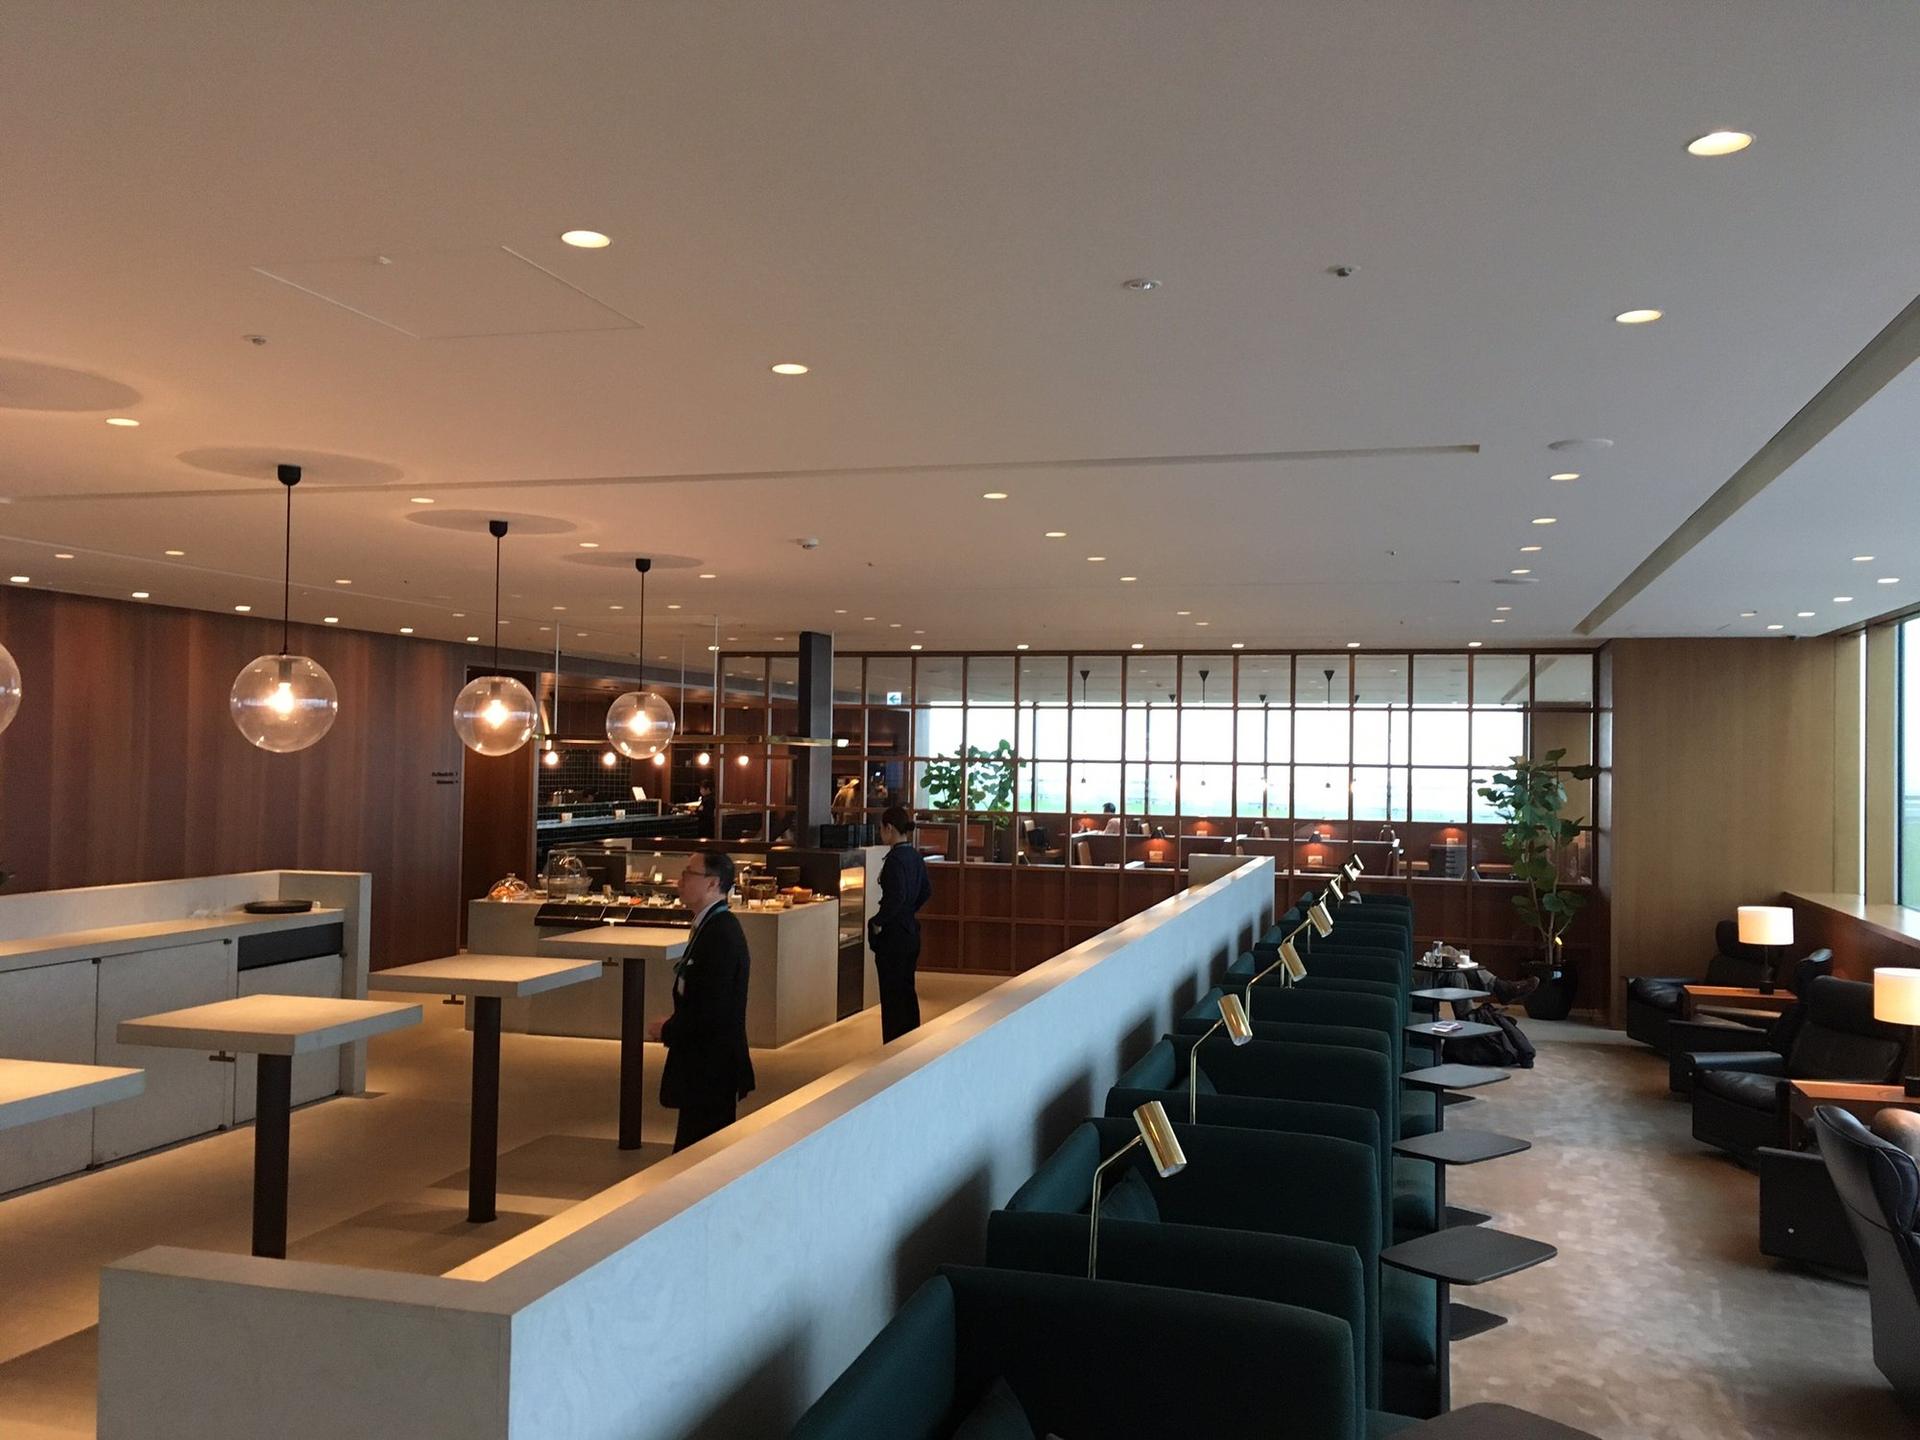 Cathay Pacific Lounge image 37 of 49